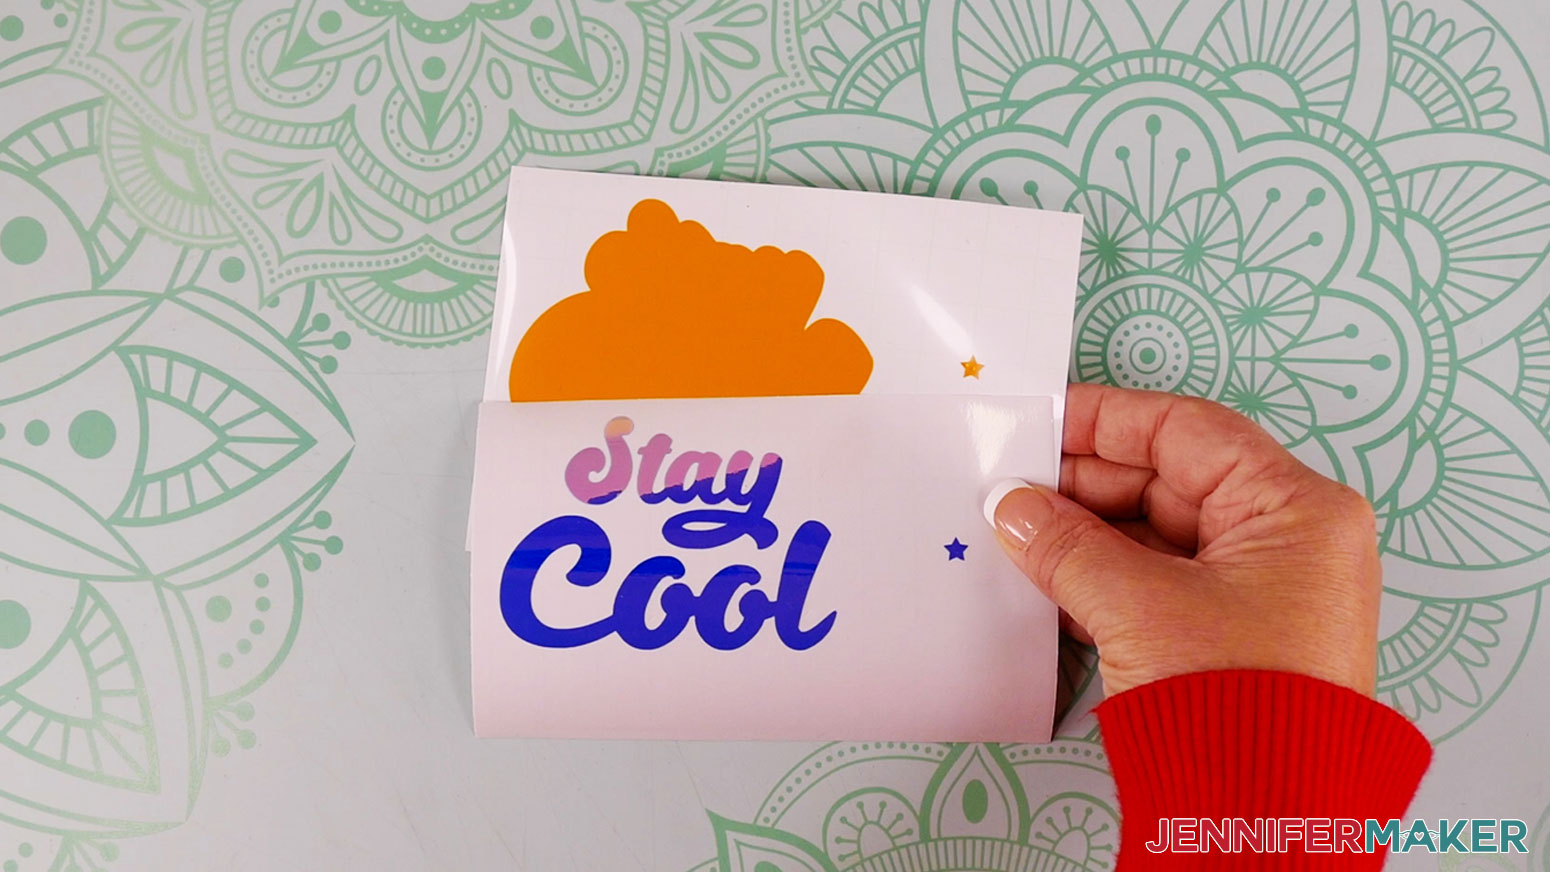 how to use transfer tape stay cool design with bottom layer registration star marks